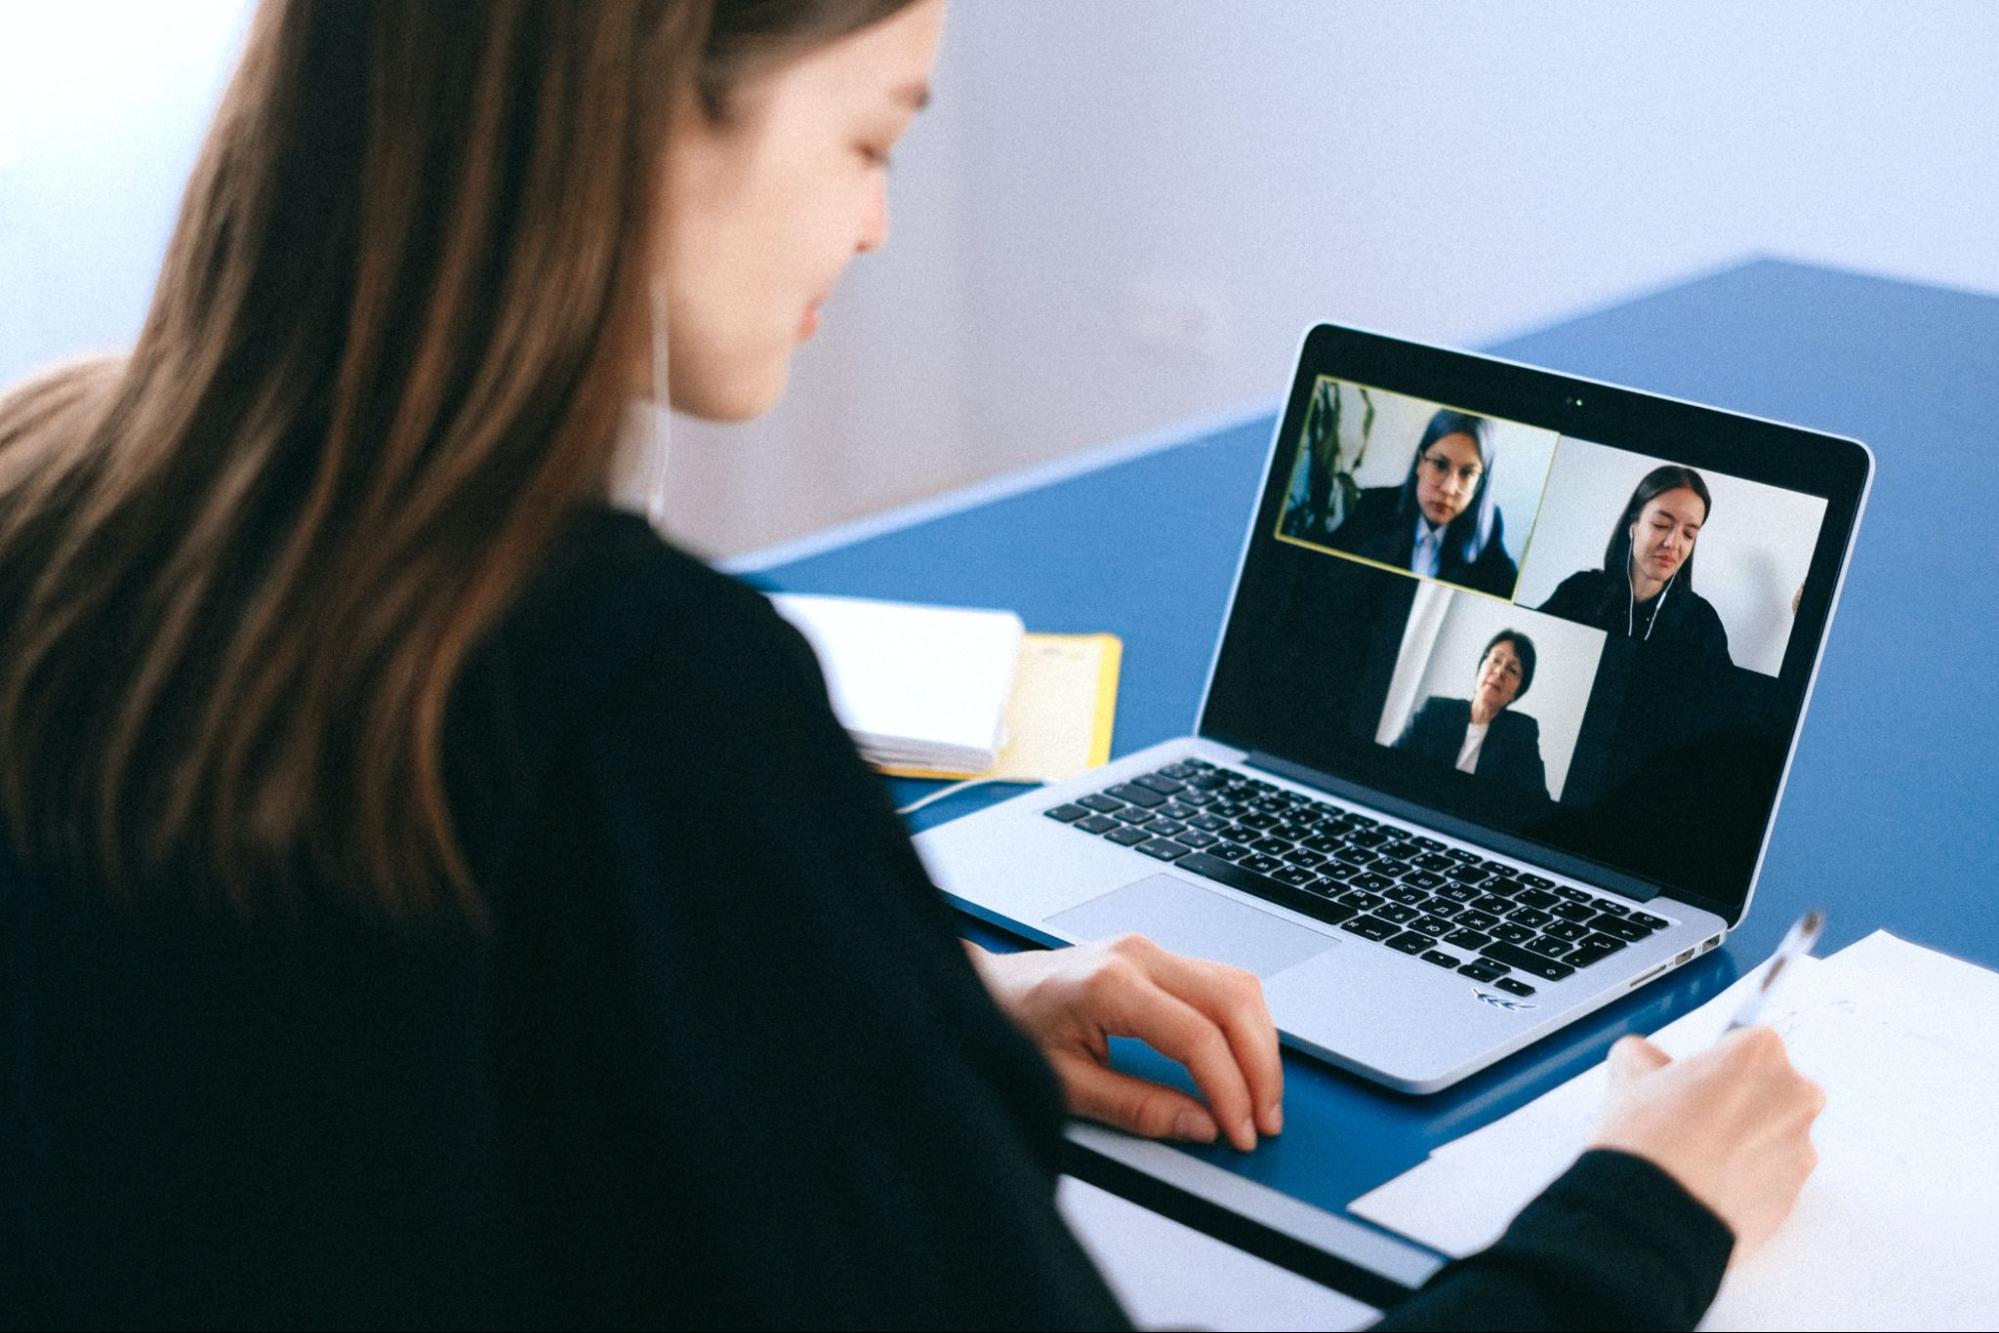 Make sure you're comfortable with the virtual meeting platform